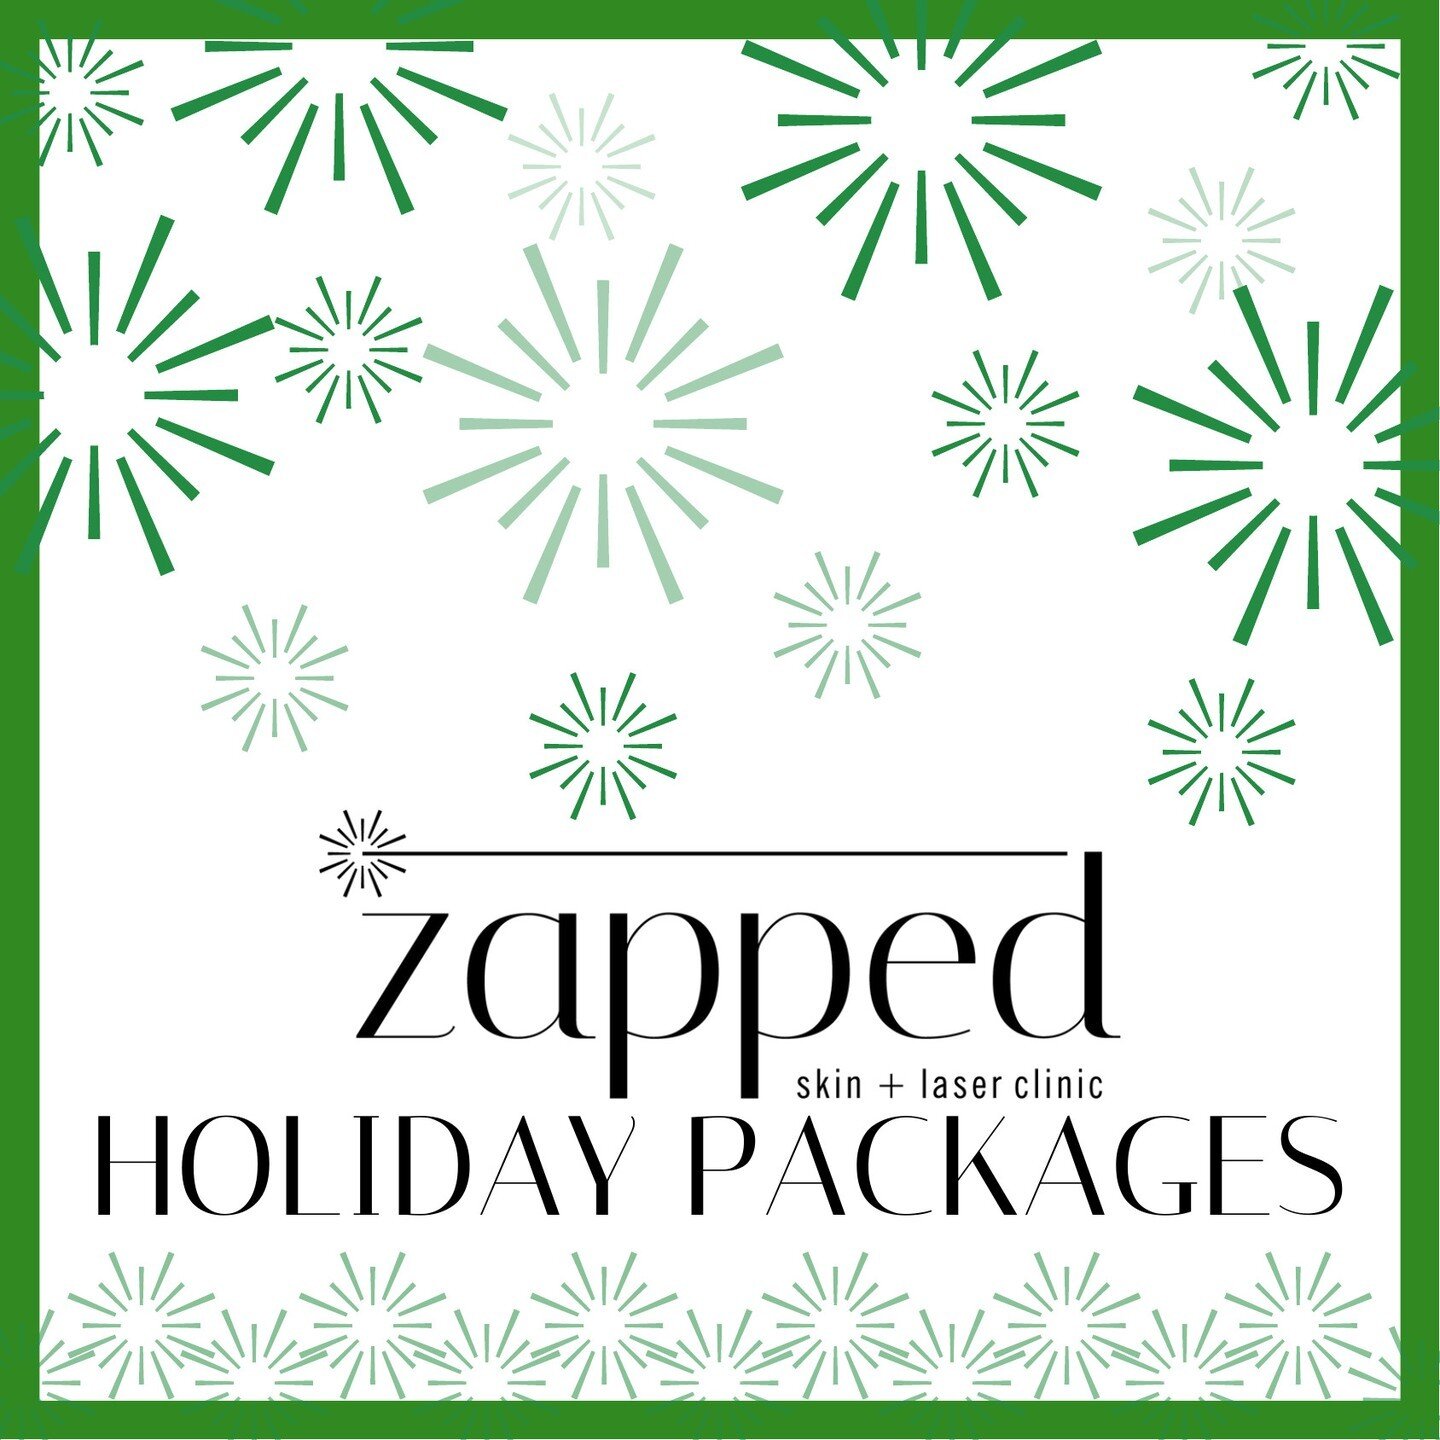 Happy Holidays! Swipe through to check out our December specials ✳️

Call to book (718)-689-5565

#igotzapped #zappedbeauty #laserclinicbrooklyn #skinclinicbrooklyn #brooklynlaser #lasertreatmentbrooklyn #brooklynskincare #skincarebrooklyn #williamsb